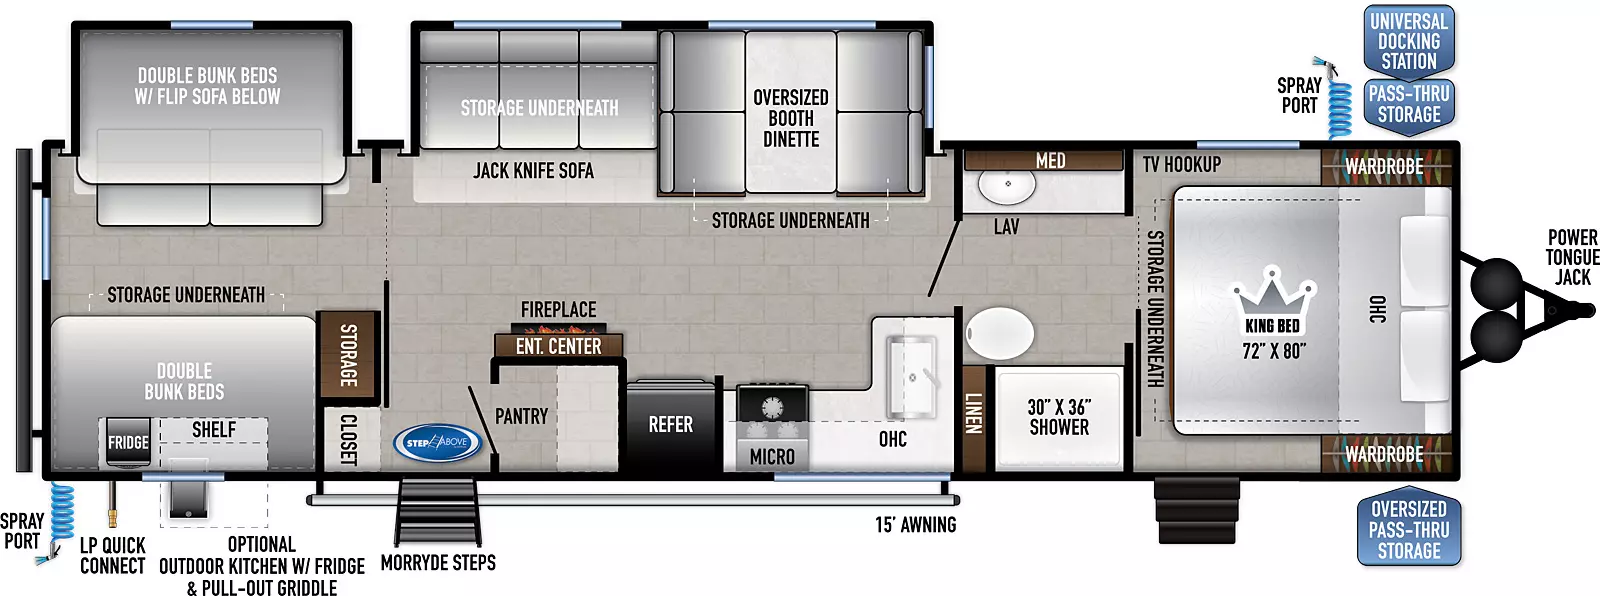 The 31KBH has two slides on the off-door side – one in the rear bunk area of the coach and one in the kitchen living dining area. This floorplan features two entry doors on the door side – one near the rear leading into the main kitchen living dining area, another in the front bedroom. Interior layout from front to back: front bedroom with king bed featuring overhead cabinets, bedside wards, TV hookup, underbed storage and solid sliding privacy door; pass through bathroom to kitchen living dining area; bathroom has sink and counter space with overhead cabinets on off-door side and a porcelain toilet, linen cabinets and shower on the door side; L-shaped kitchen counter with overhead cabinets above residential sink, 3-burner cooktop with oven and overhead microwave, refrigerator; entertainment center with fireplace; across in the off-door side slide is the oversized booth dinette and jackknife sofa - both with storage underneath; upon entering at door side to the right is a pantry and to the left is a closet; solid sliding privacy door to bunkhouse; off-door side slide has double bunk beds with flip sofa below, across on door side has storage cabinets and double bunk bends with storage underneath. Exterior from front to back: Power tongue jack, oversized pass-thru storage on door side, universal docking station in pass-thru on off-door side with spray port; fold-up steps at bedroom entrance on door side, solid steps at main entry, optional outside kitchen and 15' awning.